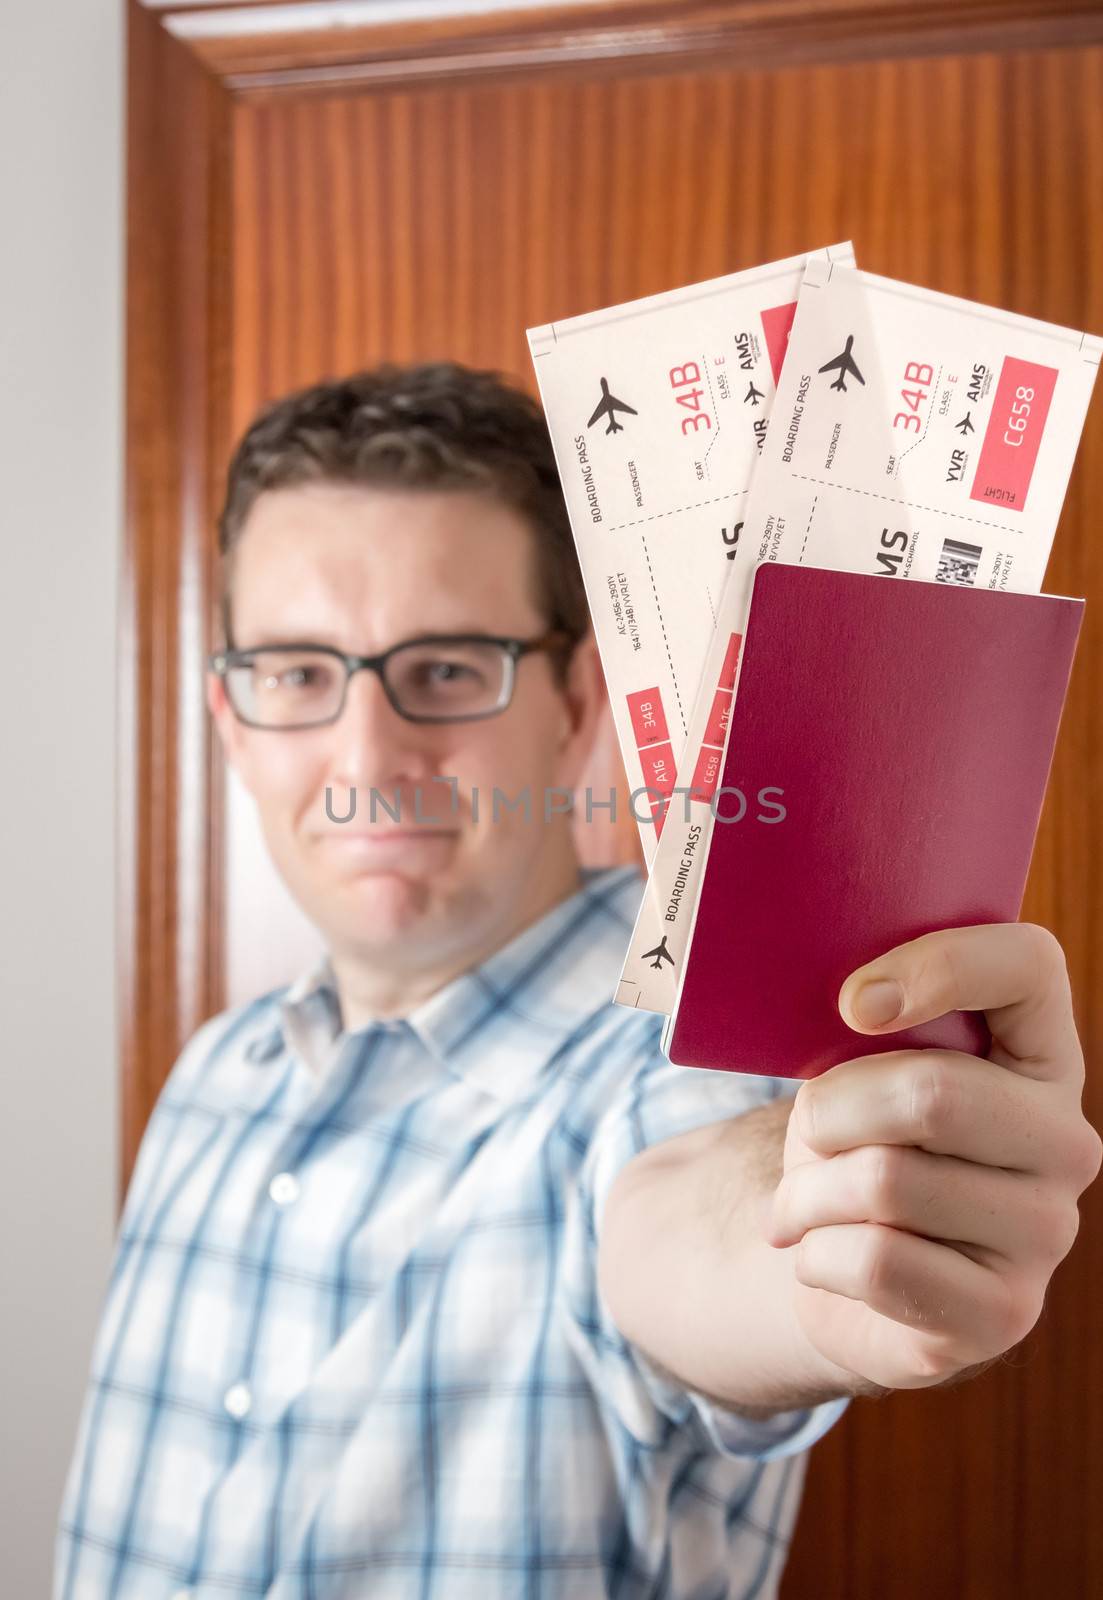 Portrait of happy man showing boarding pass and passport ready to his holidays travel